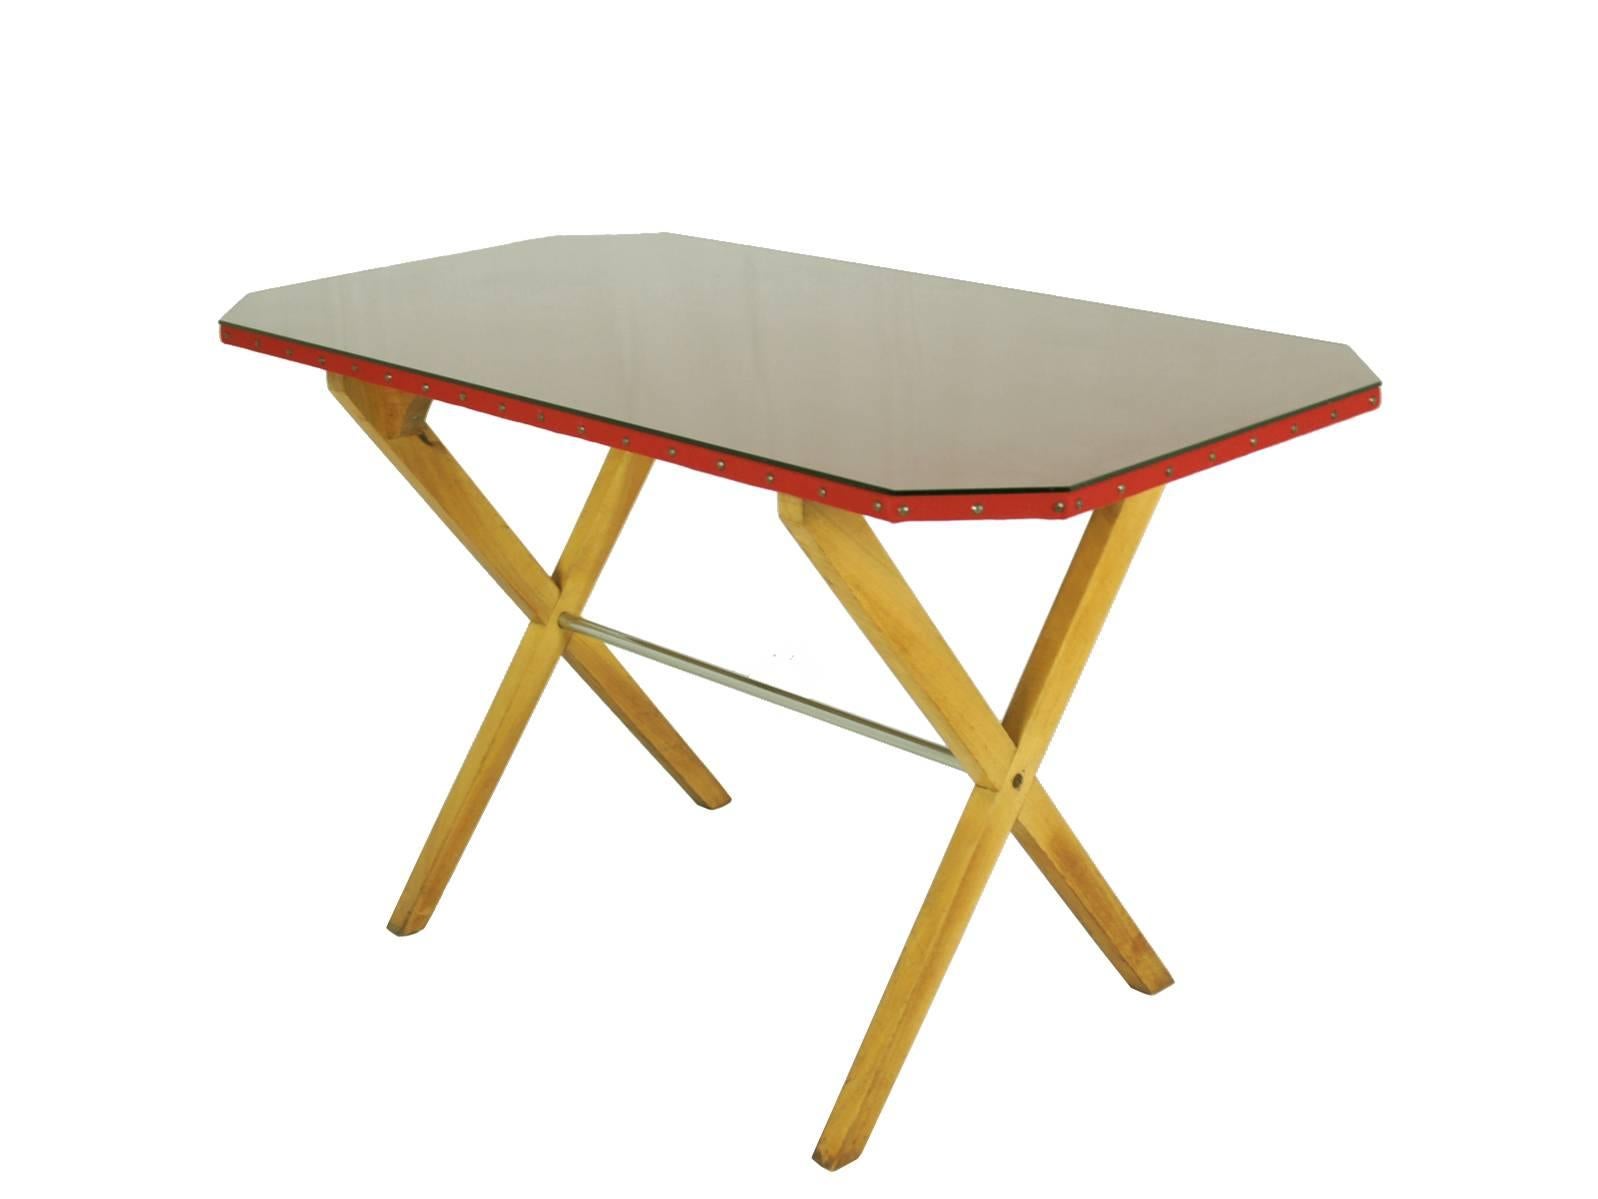 Mid-20th Century Wood, Fabric and Glass Italian 1940s Rationalist Desk For Sale